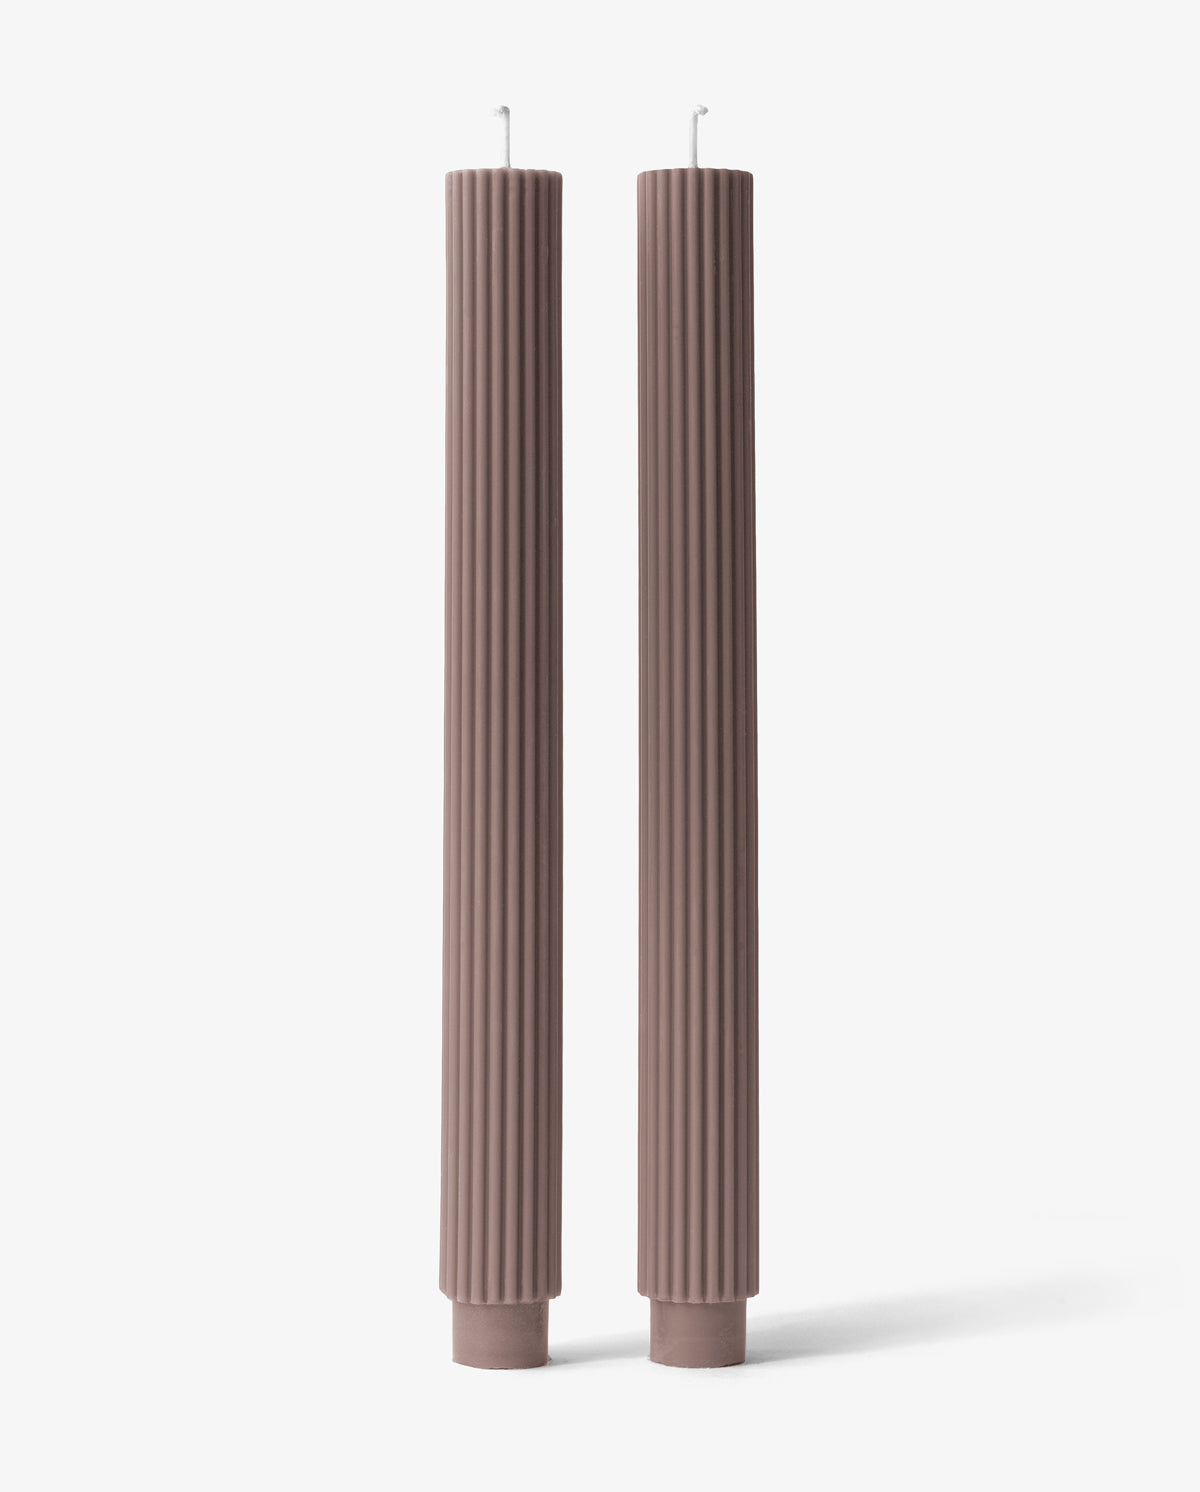 Truffle Tall Ribbed Candle